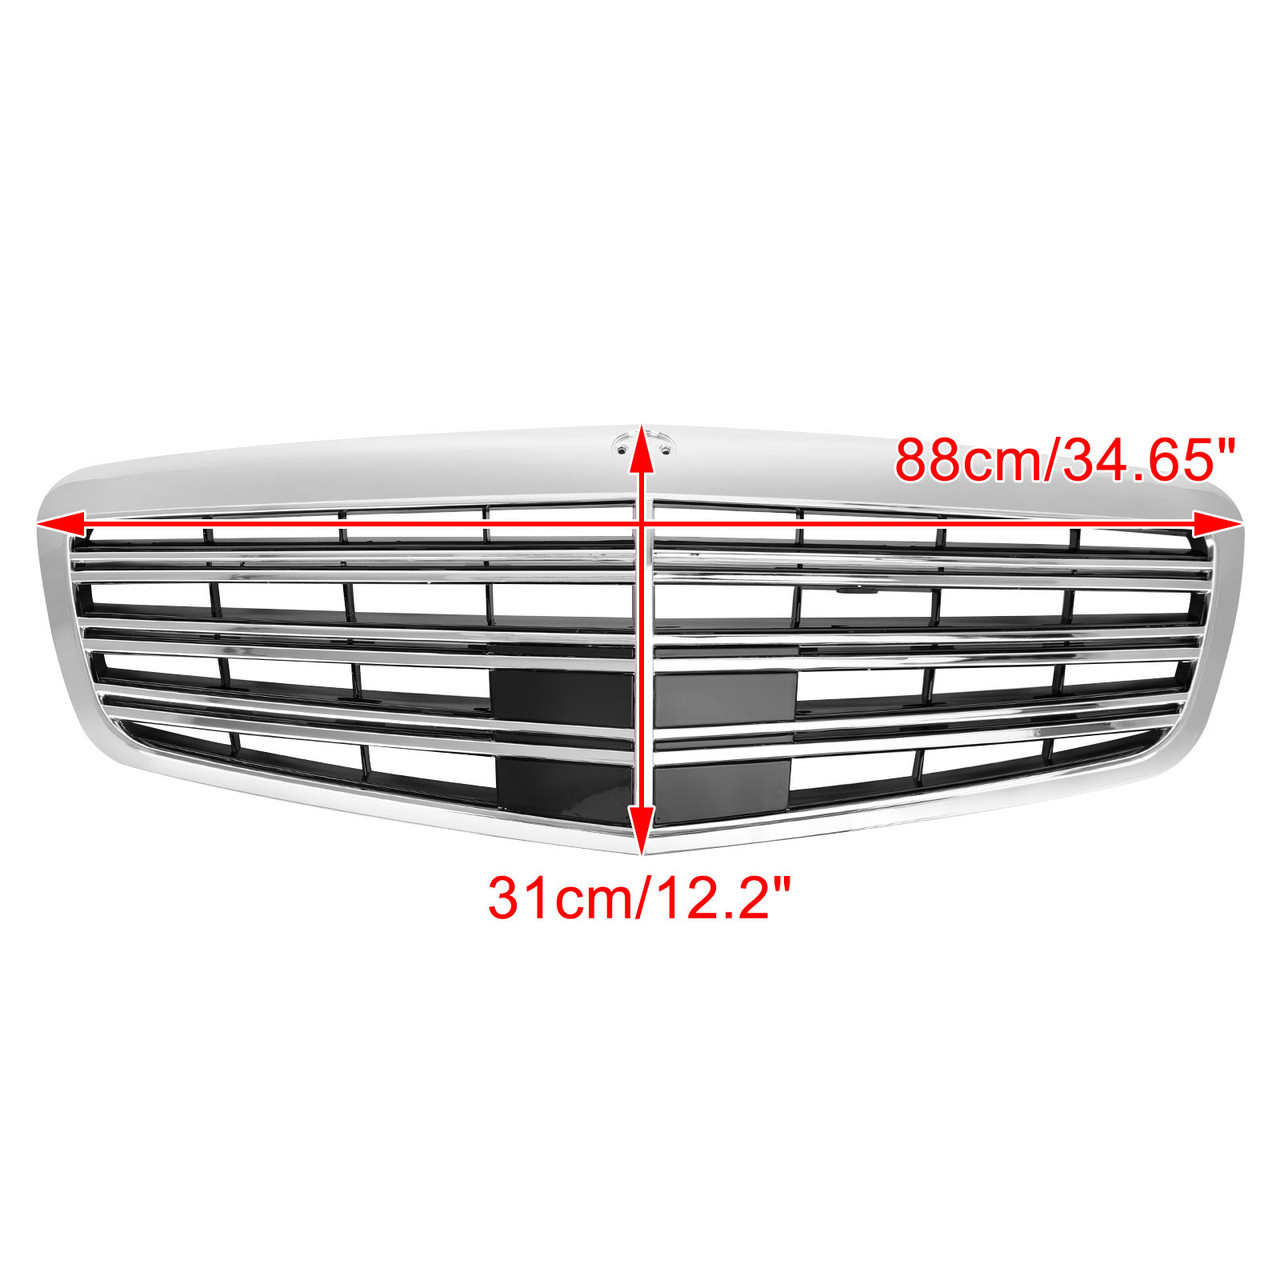 10-13 Mercedes Benz S-Class W221 S550 S600 S63 S65 AMG style Front Grille Grill